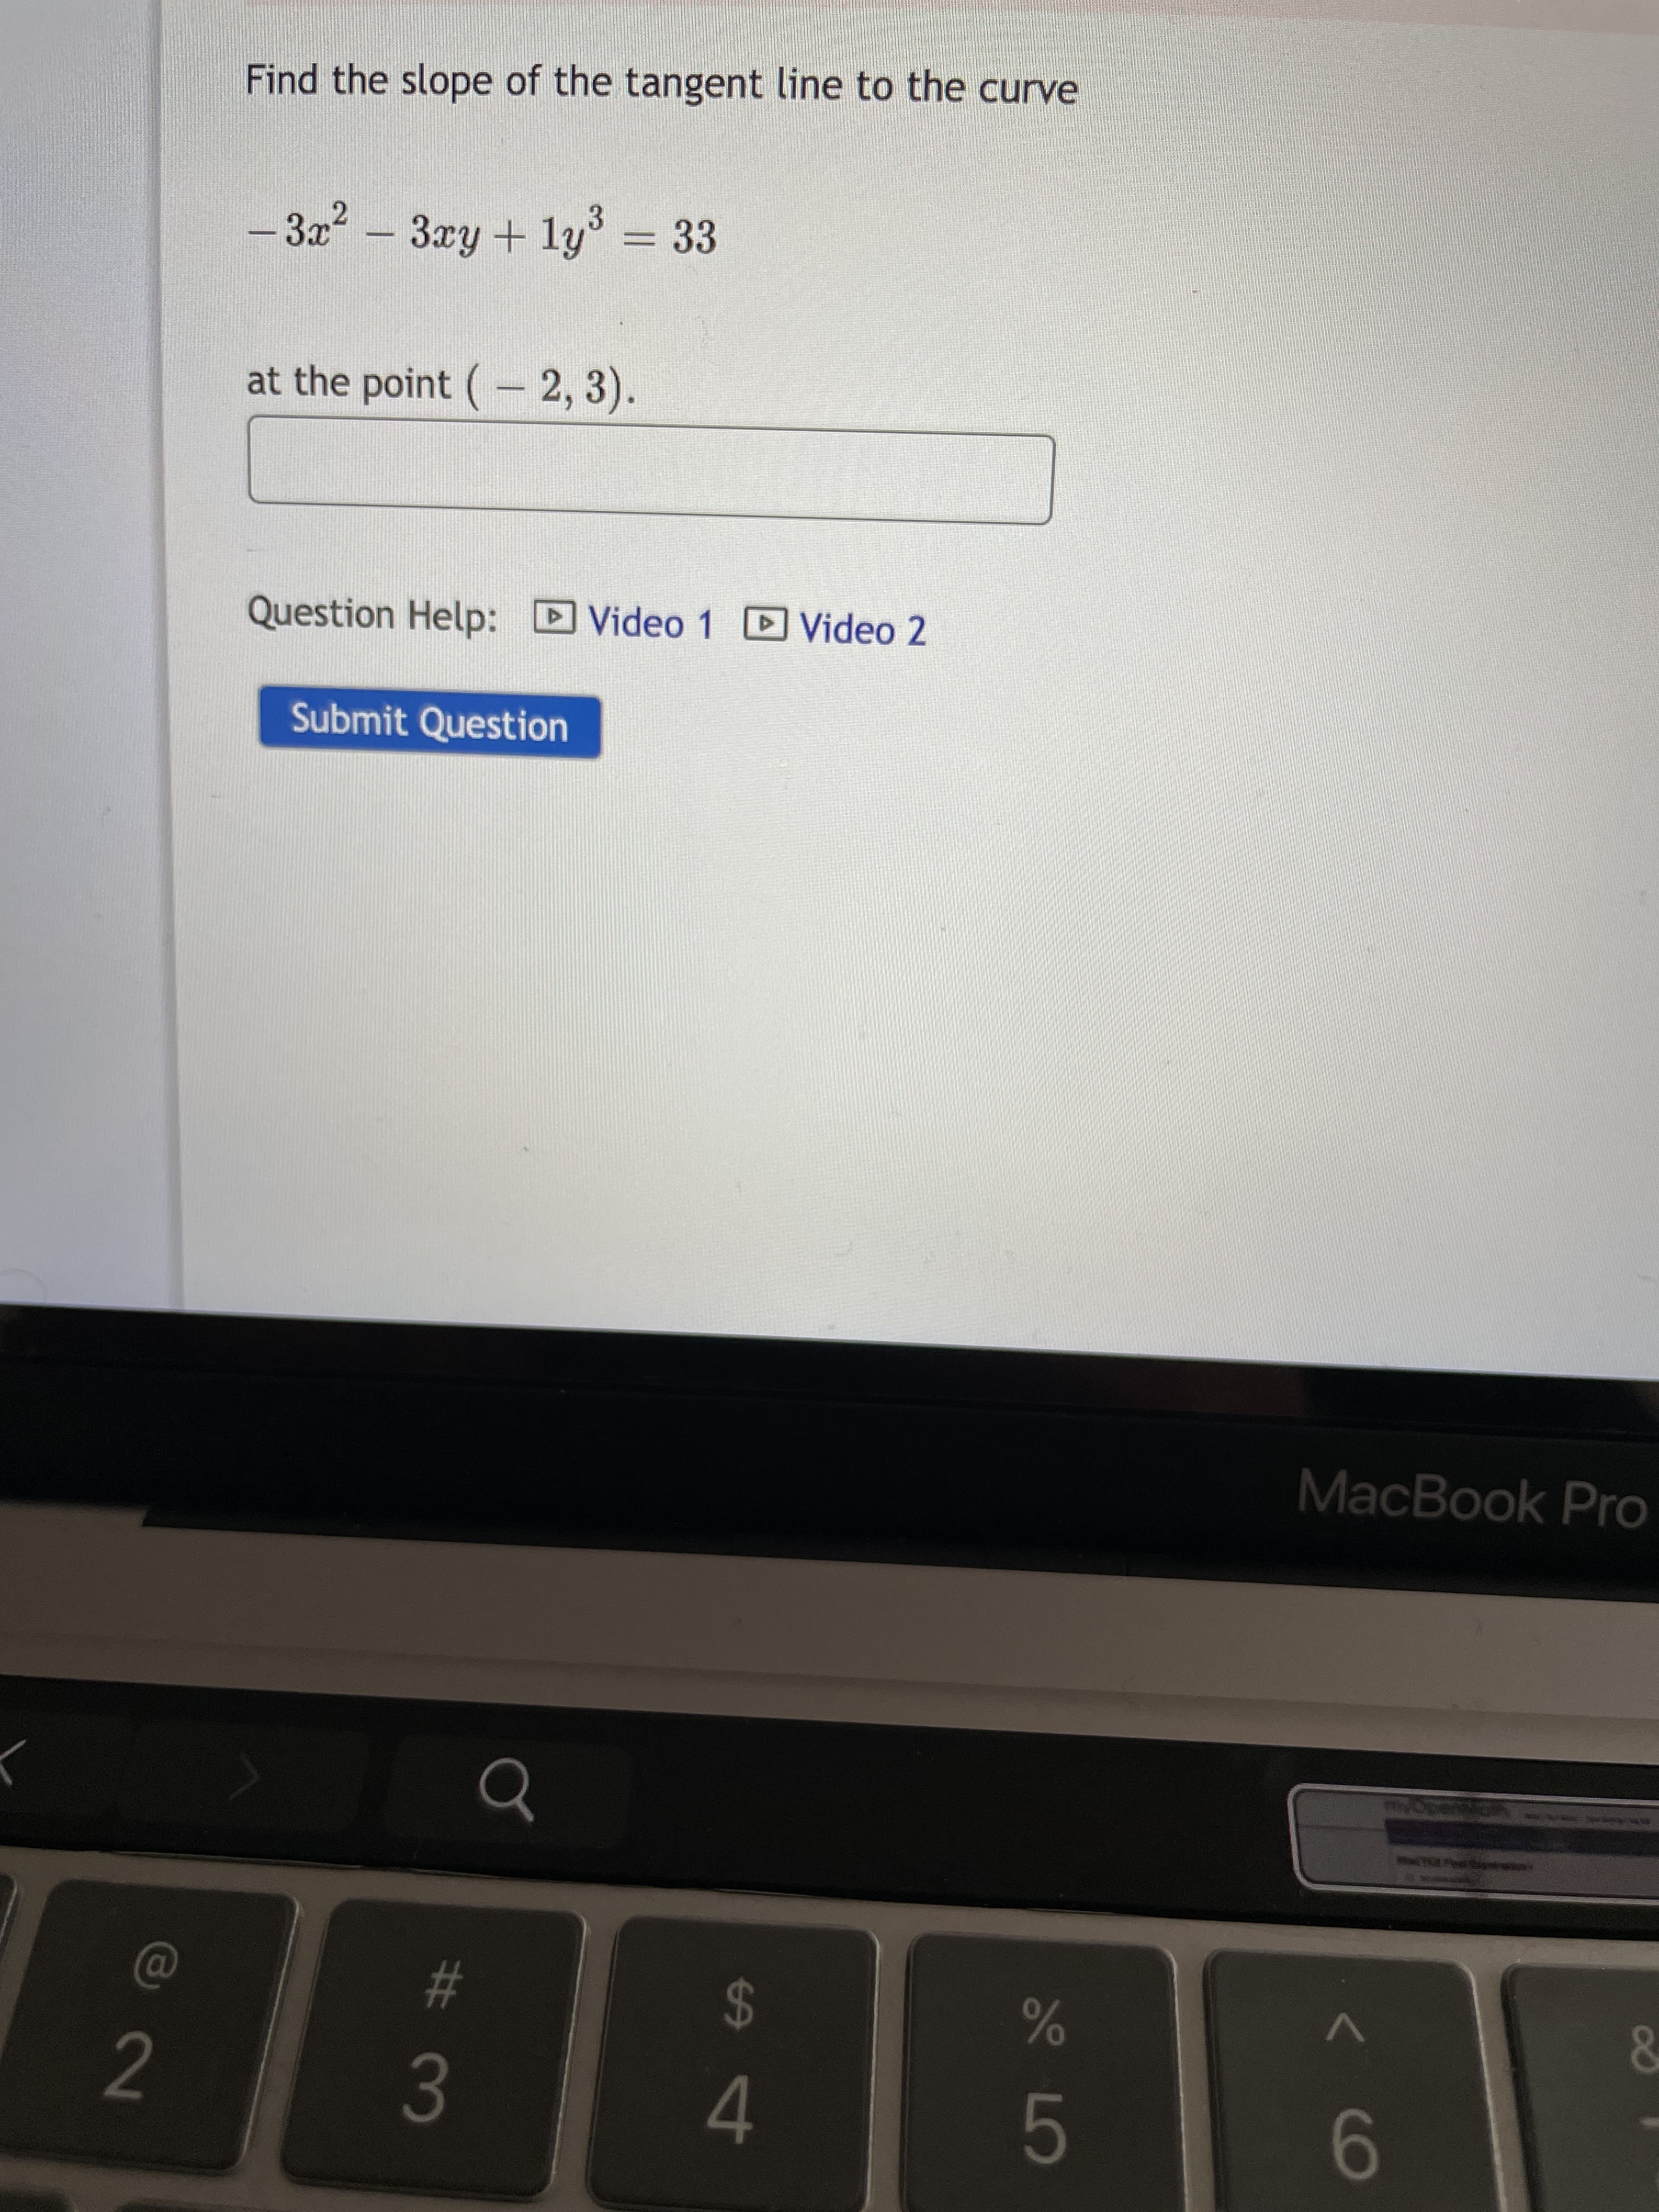 # 3
Find the slope of the tangent line to the curve
-3x²-3xy + ly = 33
at the point (- 2, 3).
Question Help: DVideo 1 D Video 2
Submit Question
MacBook Pro
%23
24
9-
